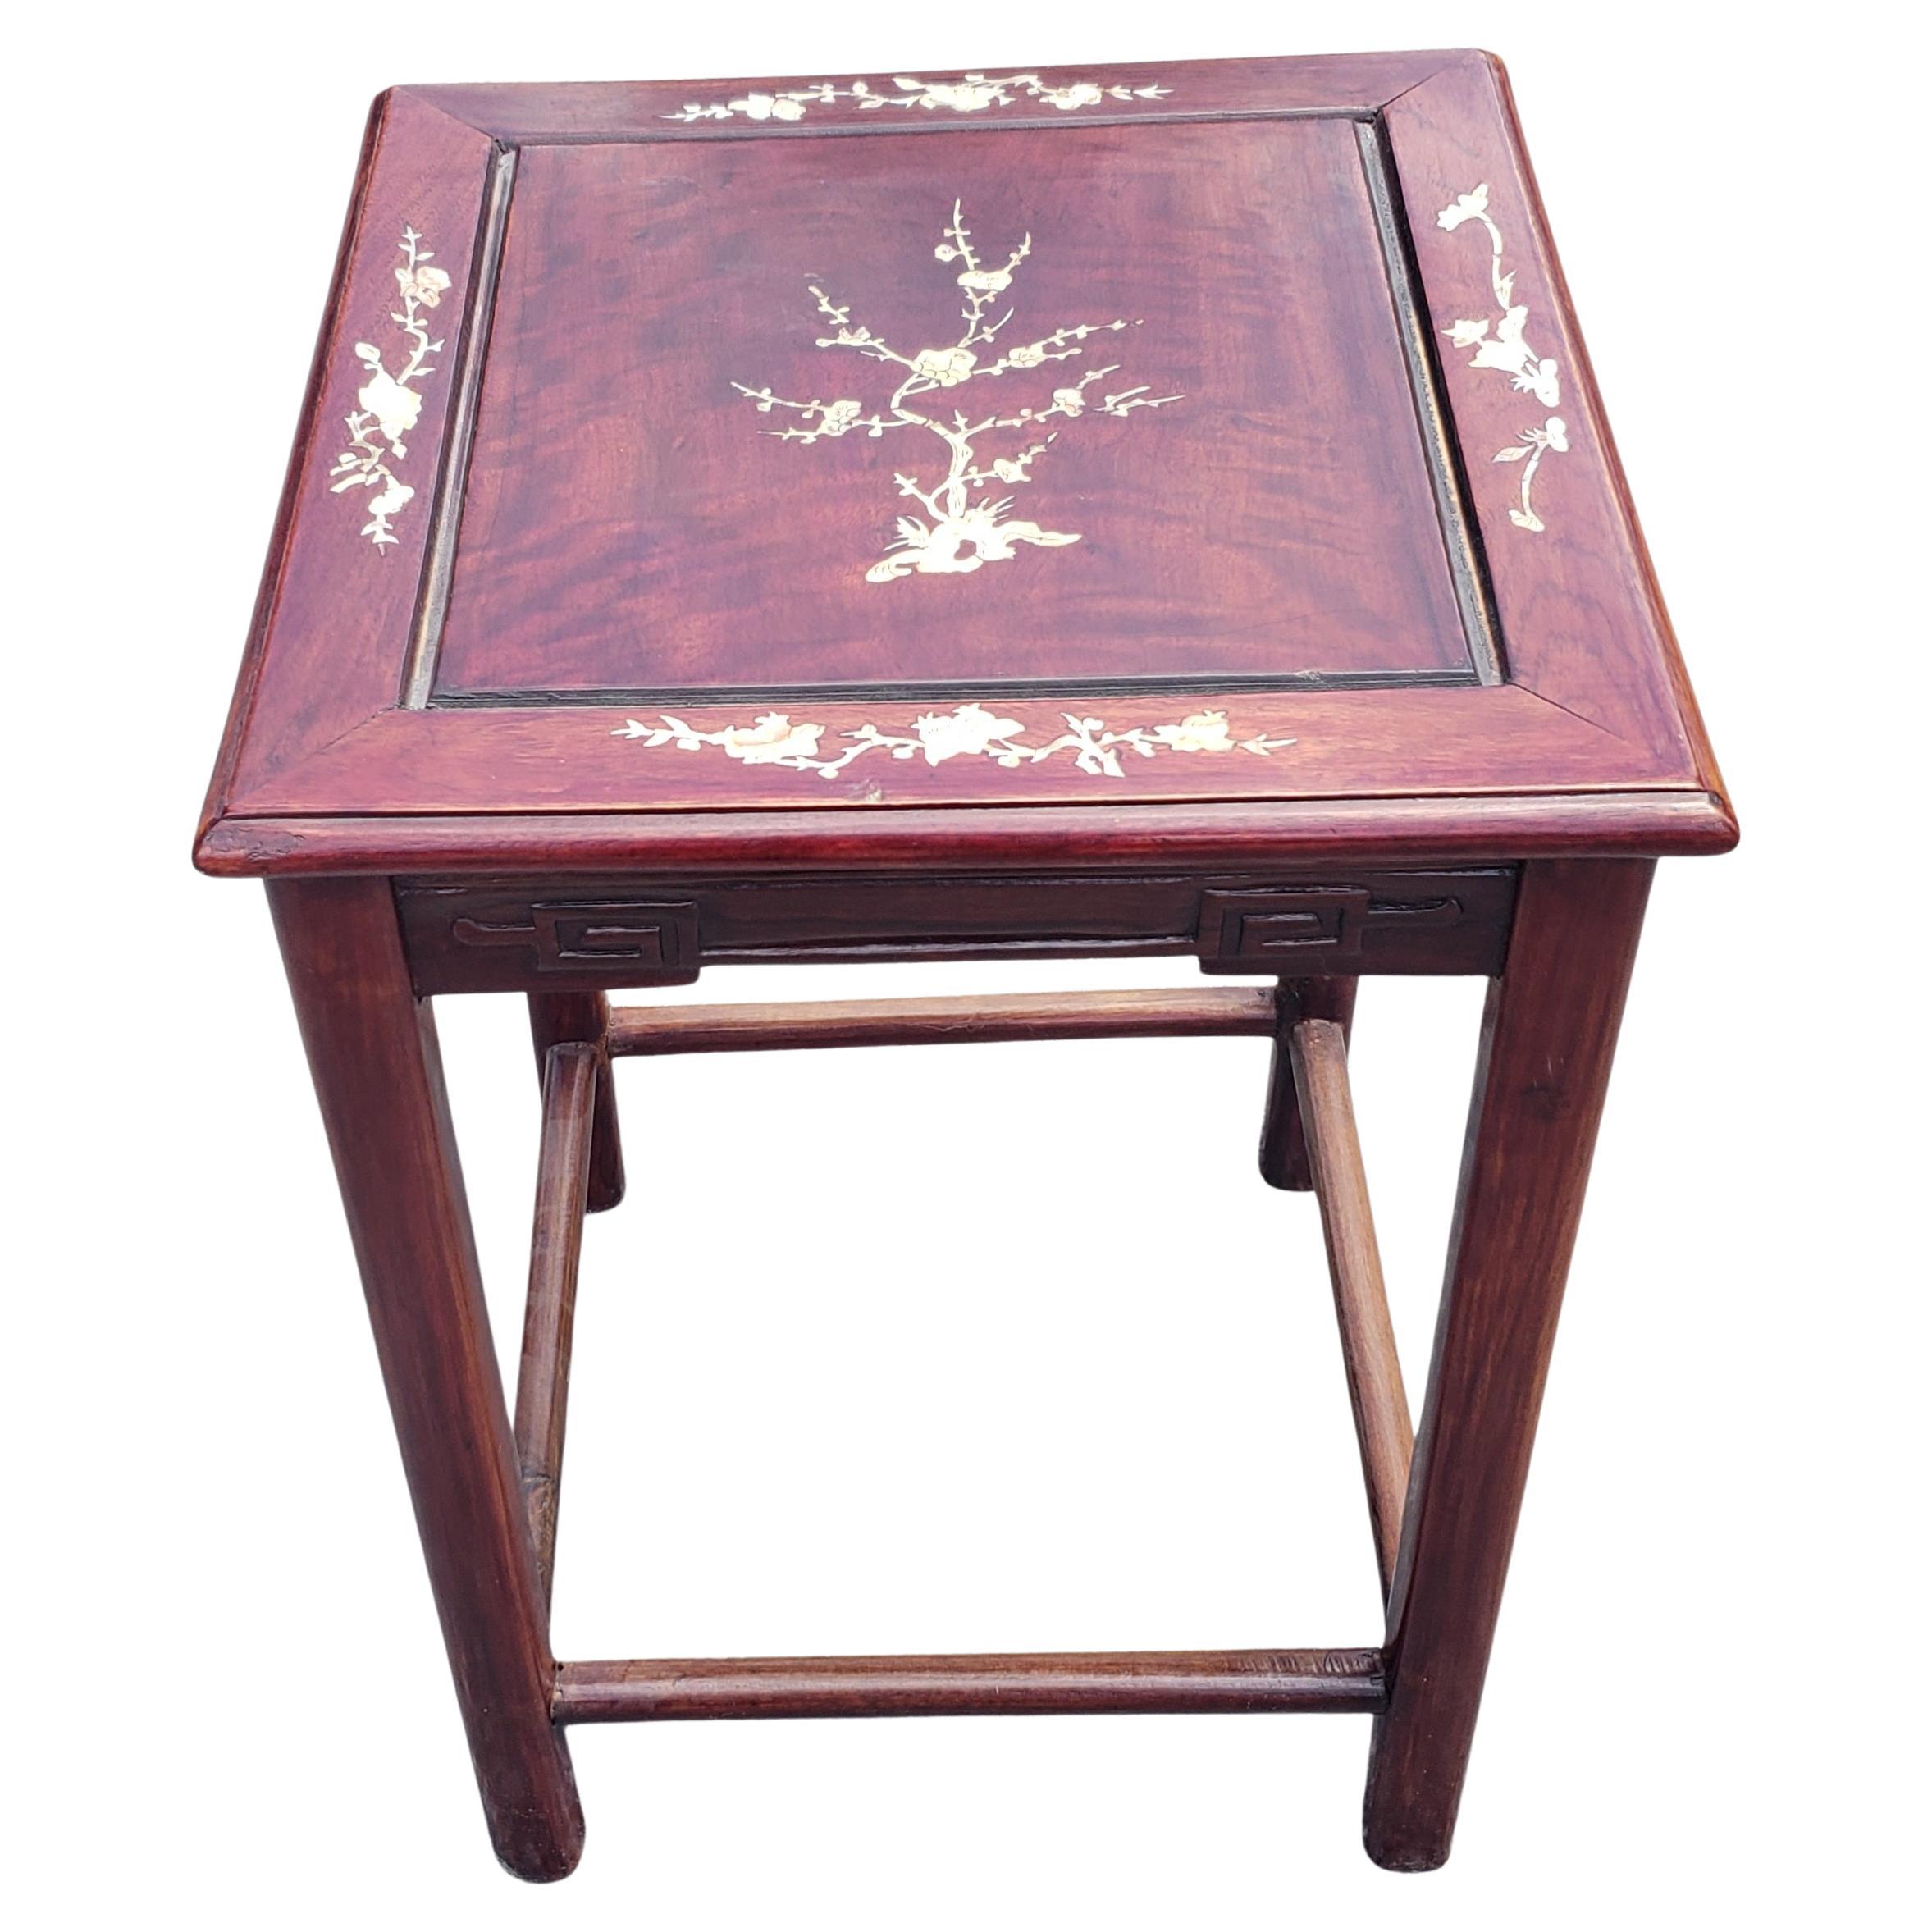 Rosewood Mother-of-Pearl Inlay Square Side Table